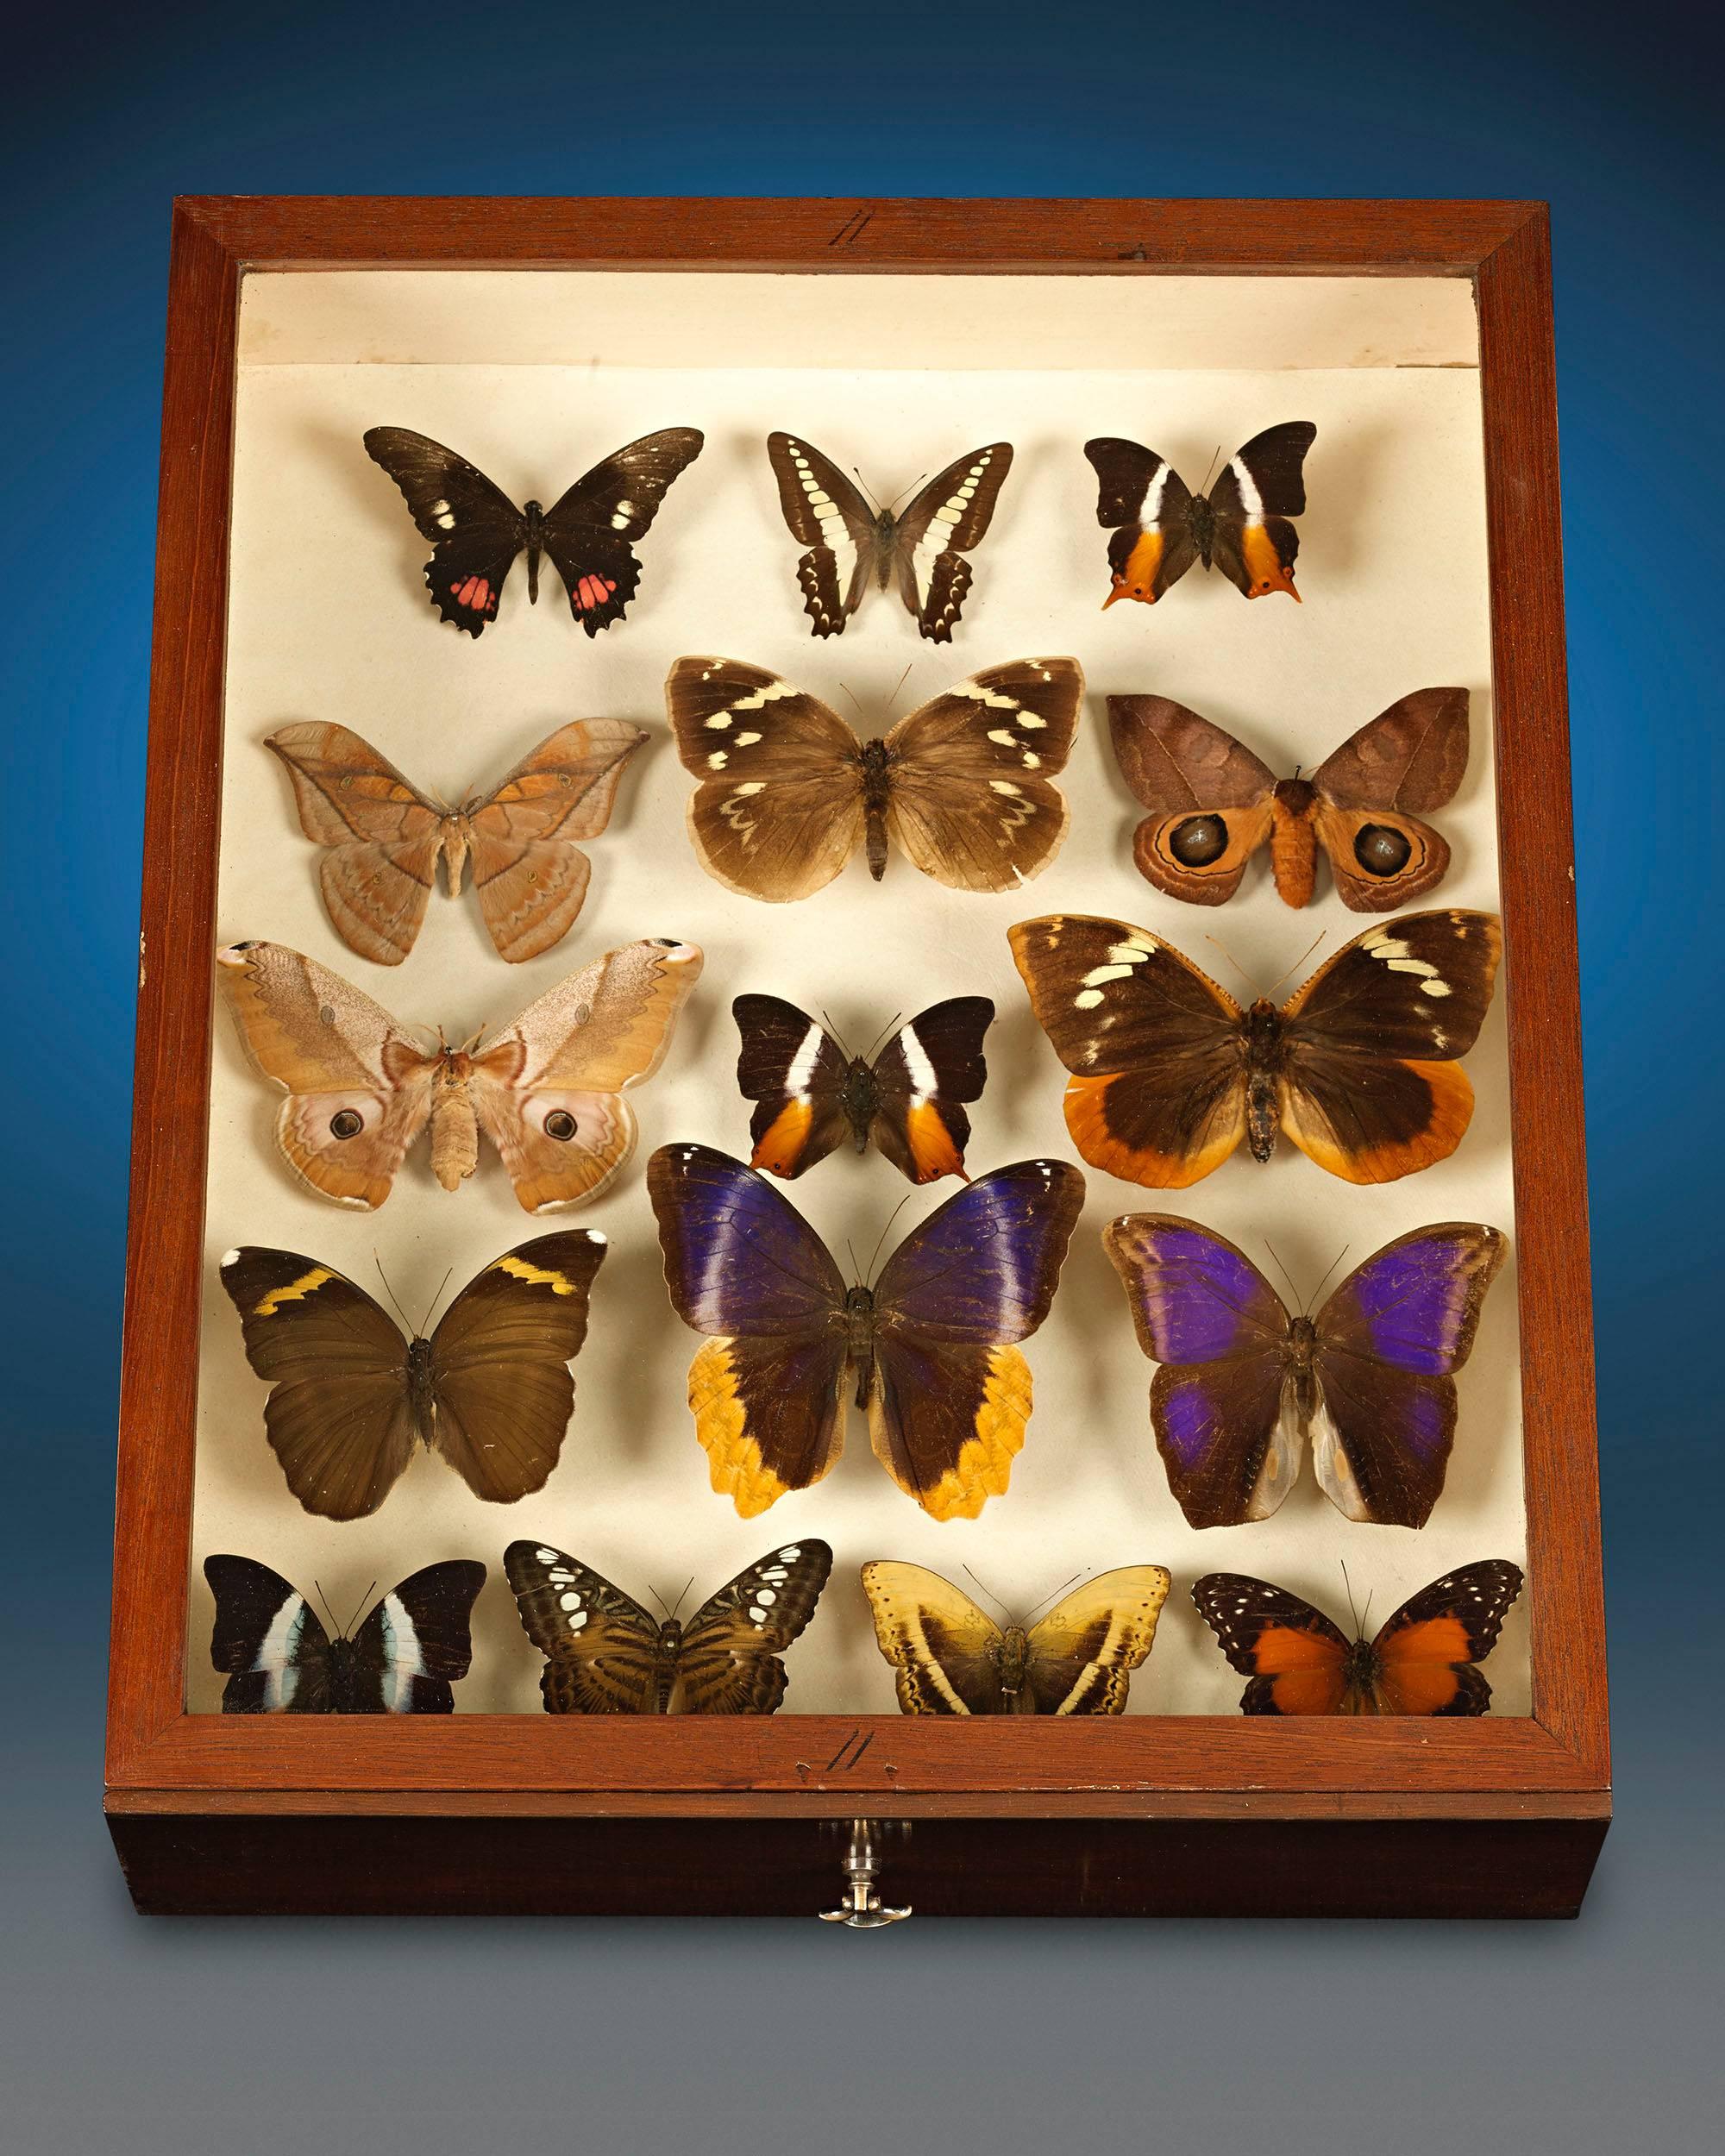 Other Mahogany Butterfly Cabinet